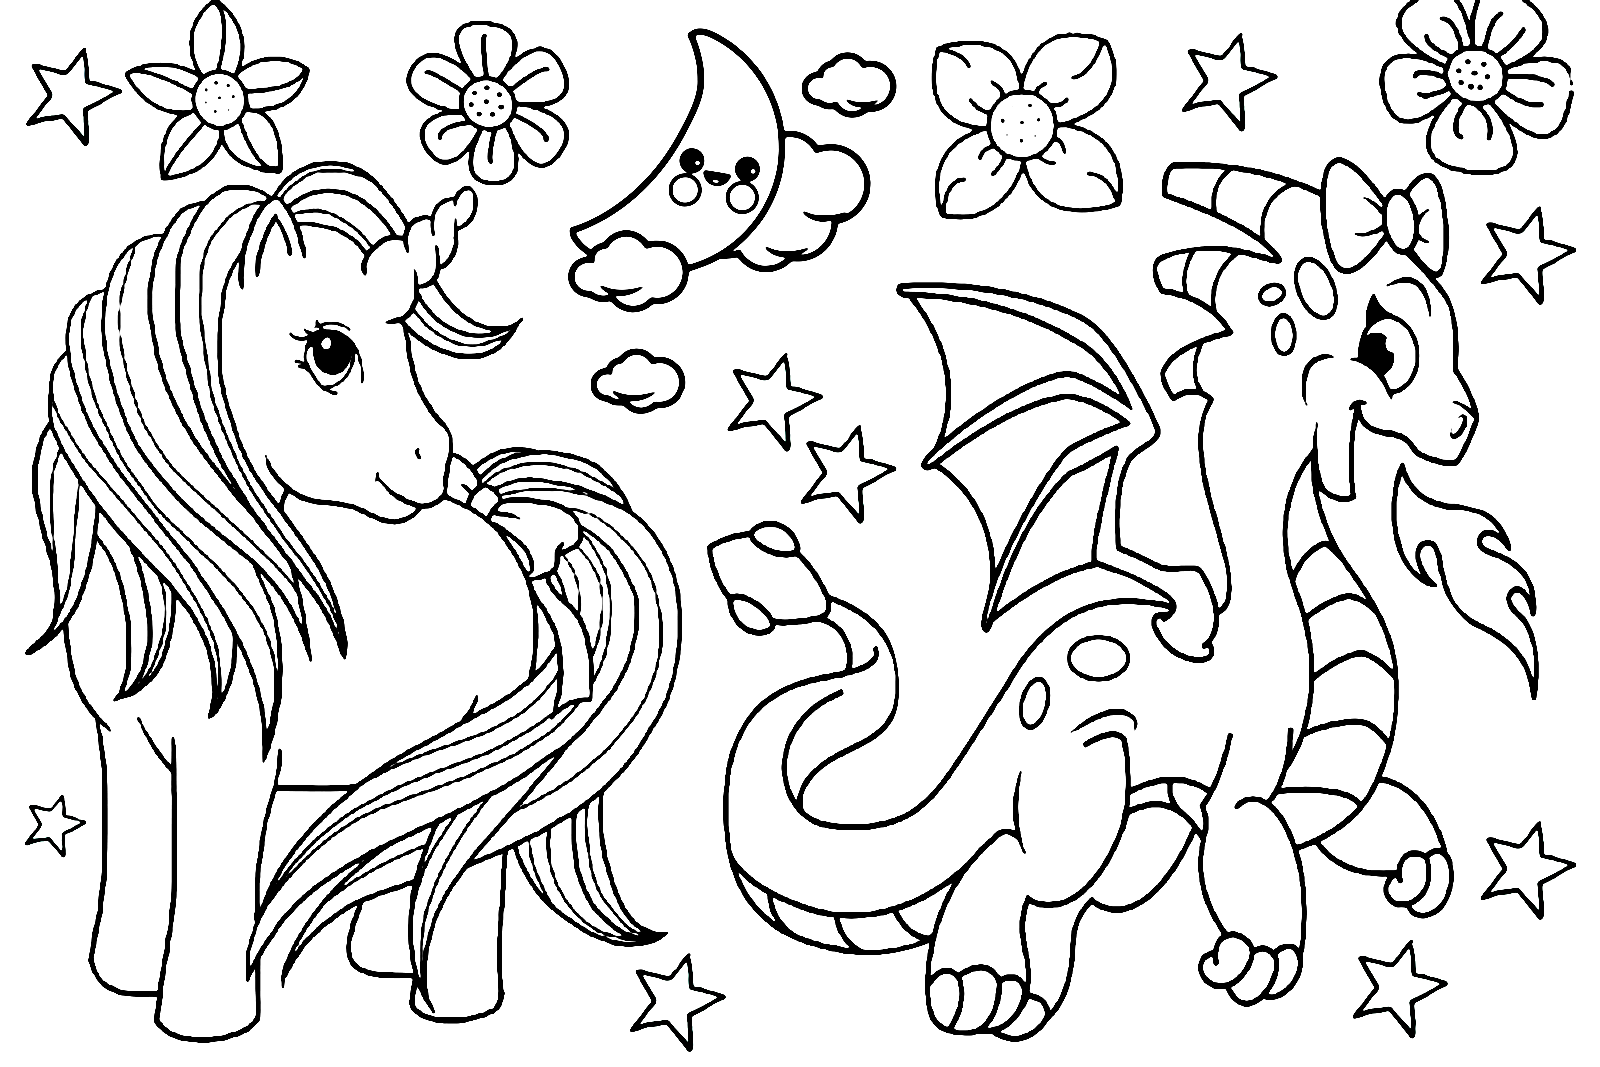 Adorable Unicorn Coloring Pages for Kids and Adults